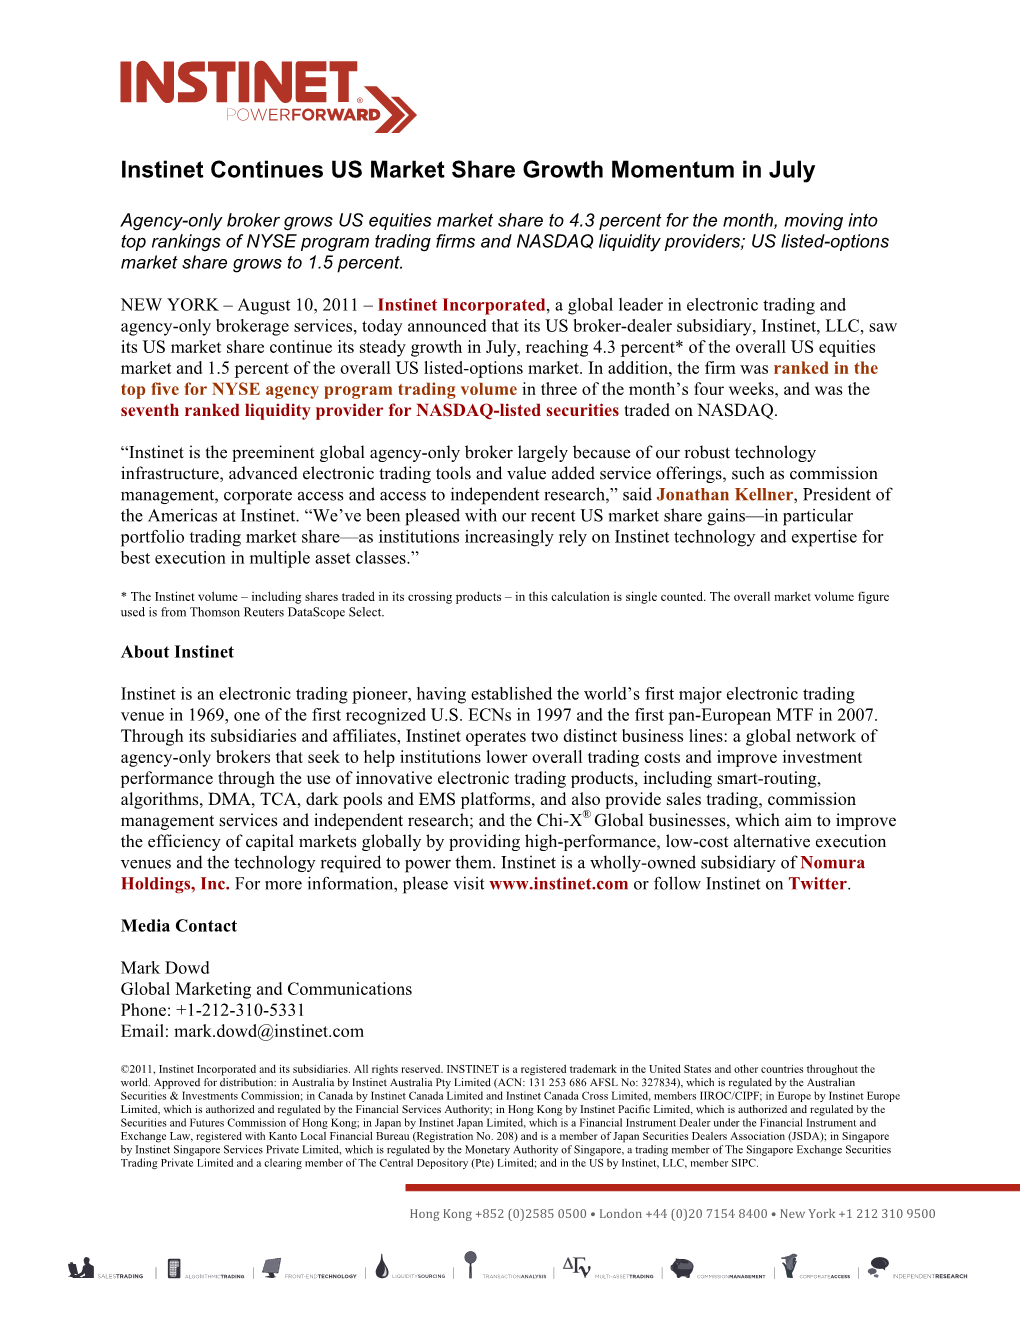 News Release Instinet Continues US Market Share Growth Momentum in July (PDF)